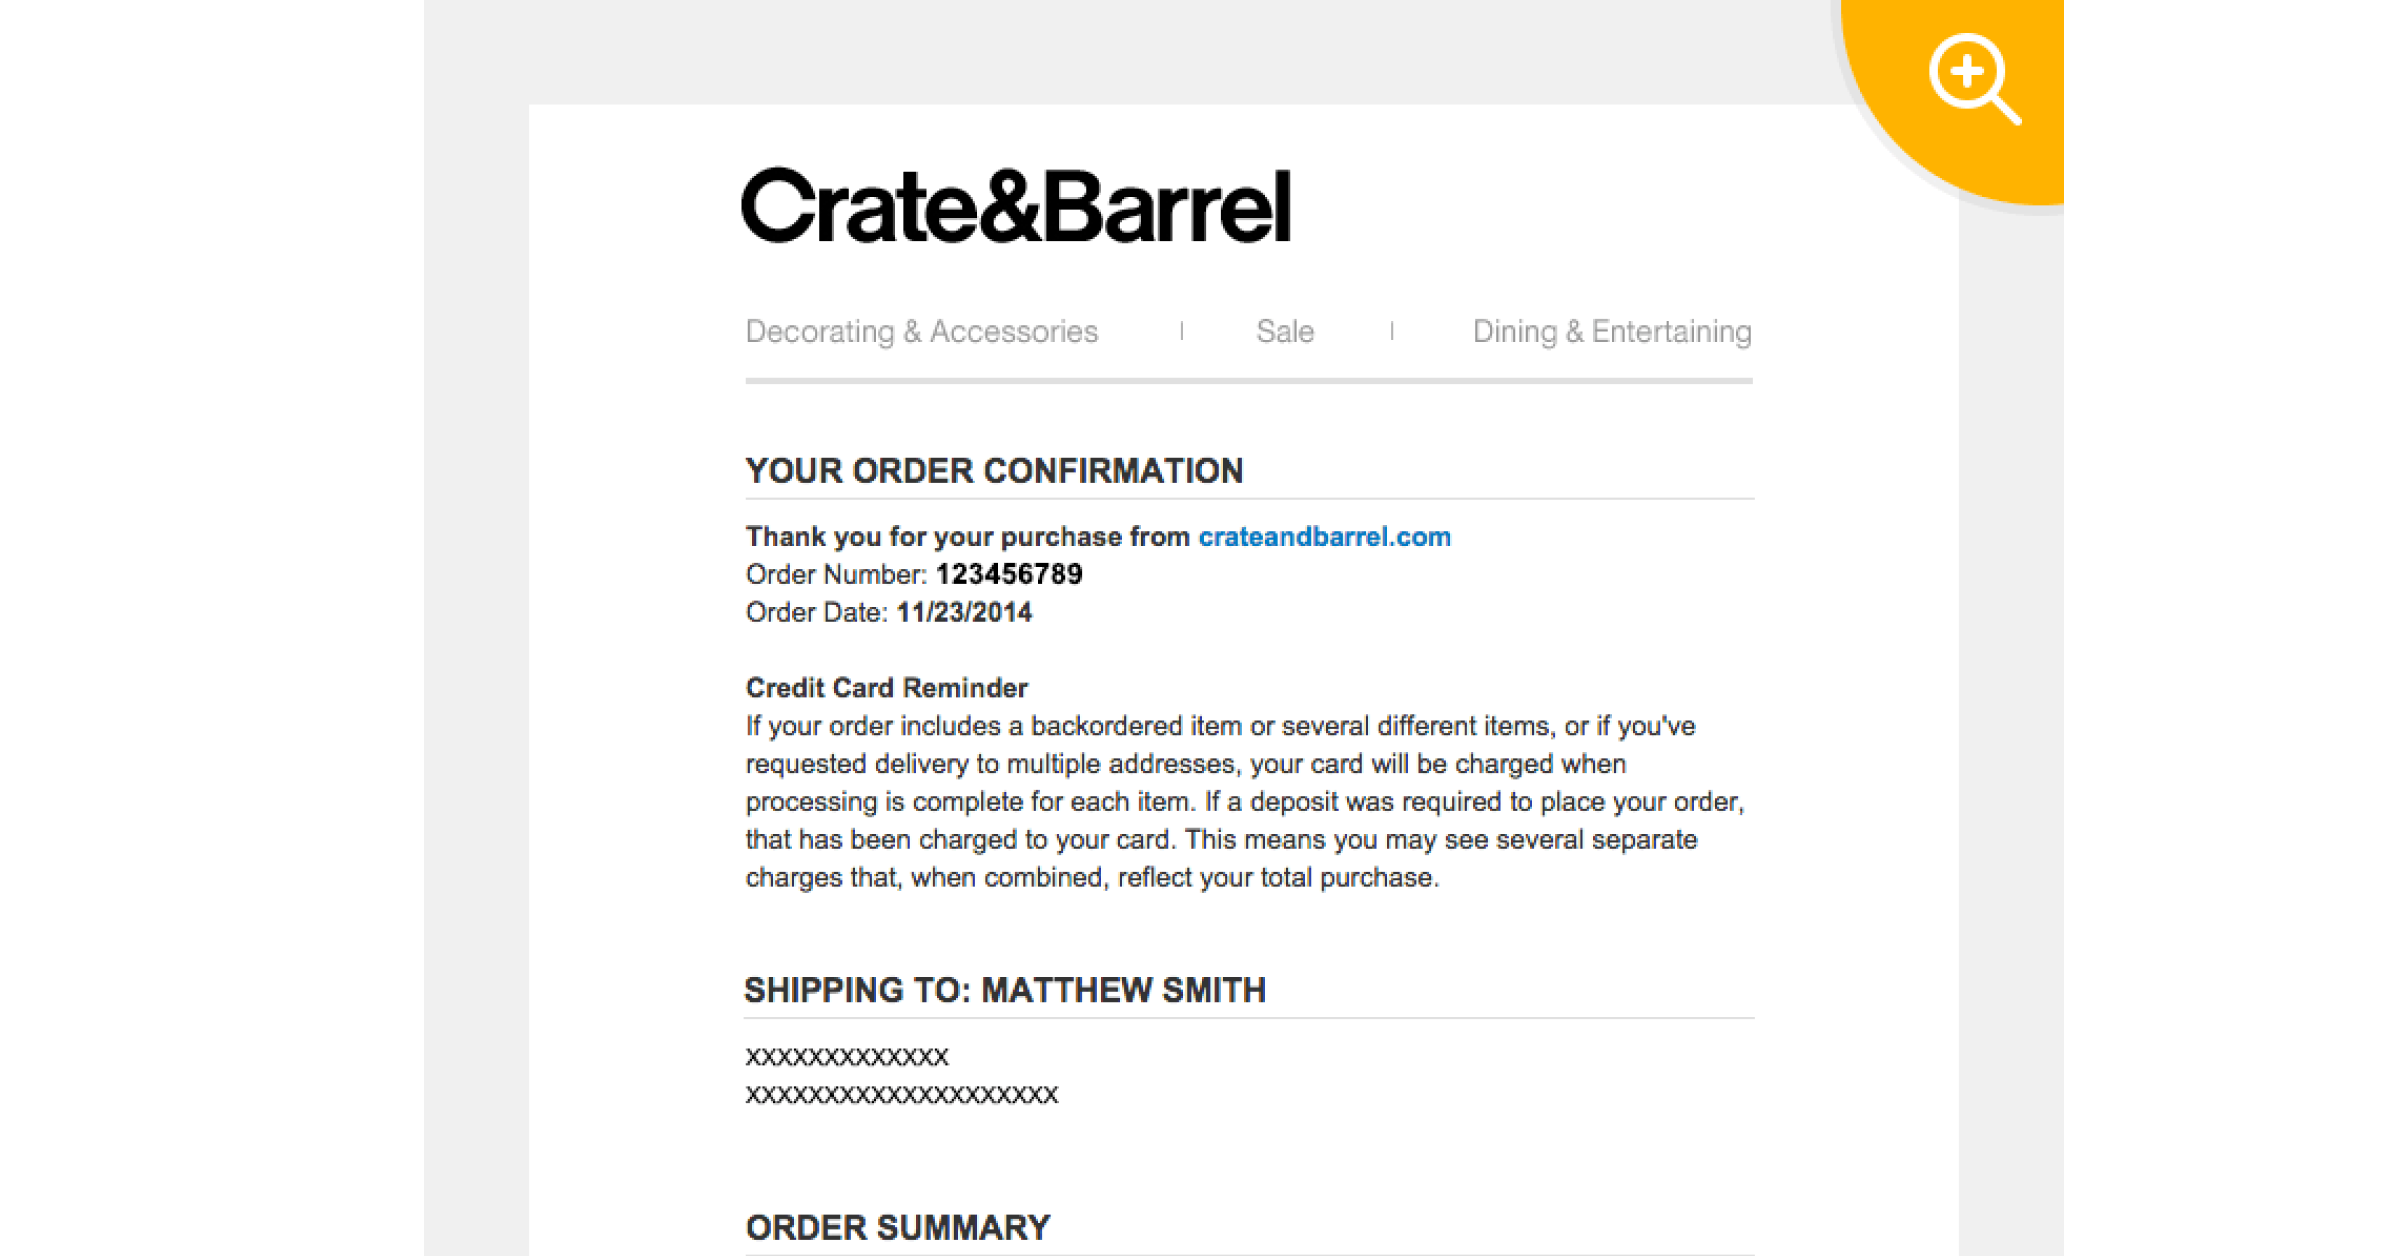 Triggered email by Crate & Barrel upon order confirmation